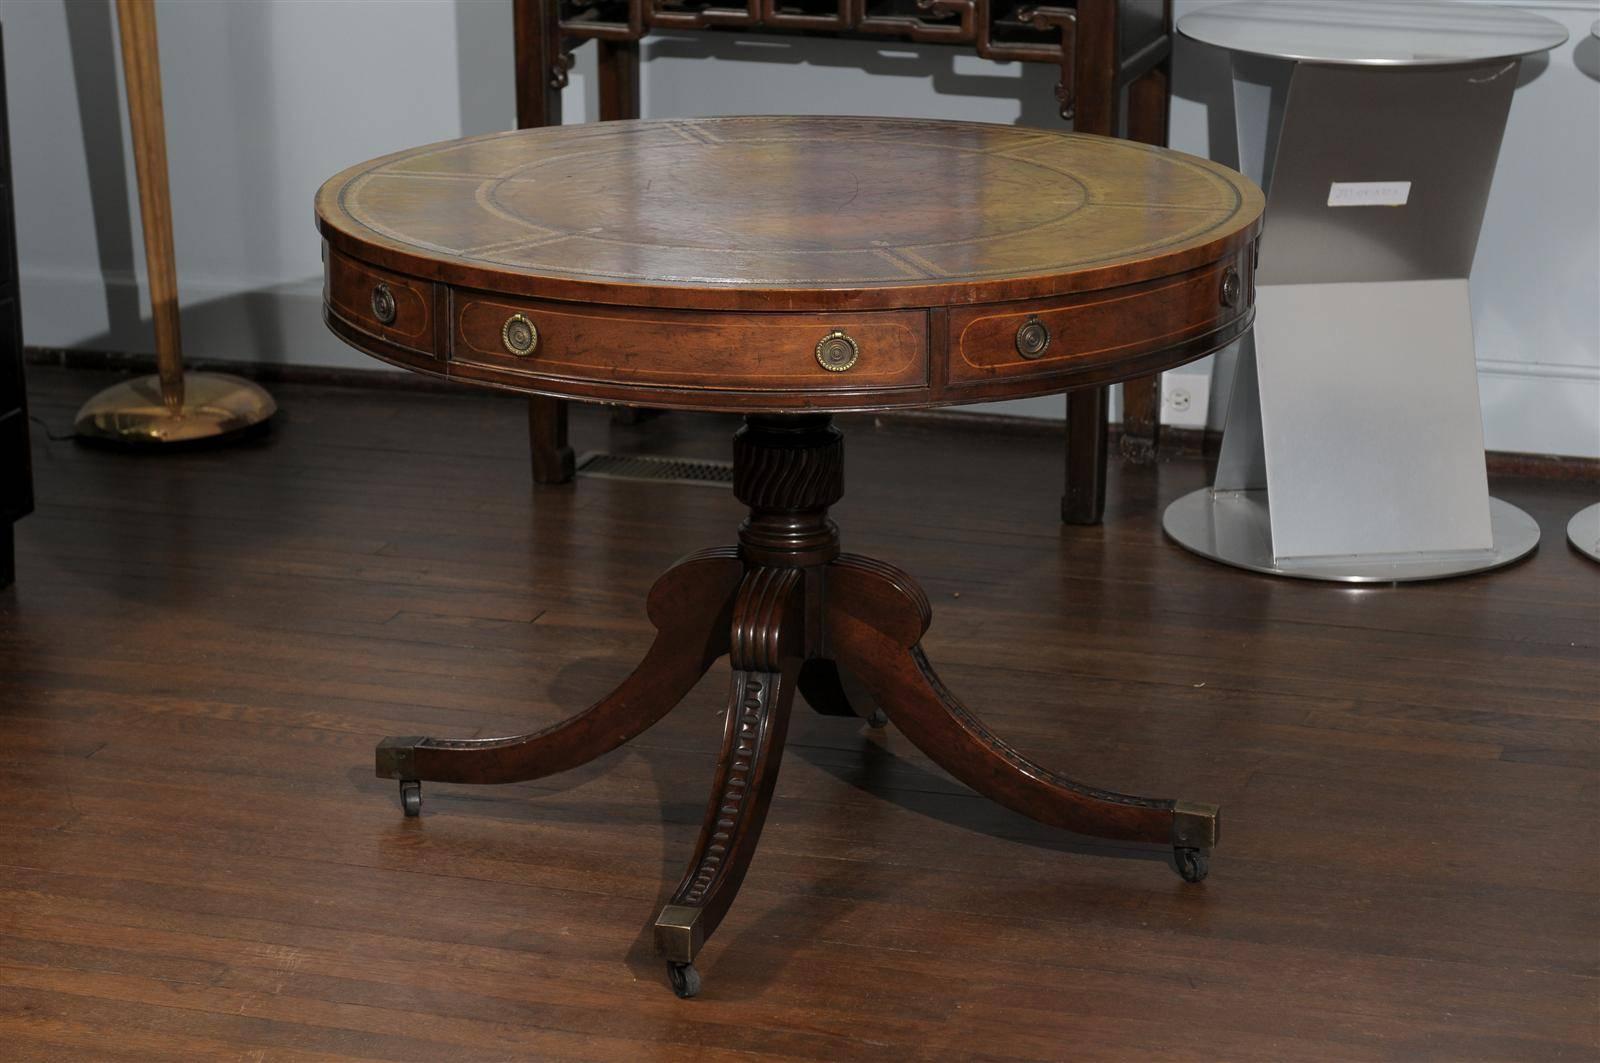 20th century Georgian style drum or rent table by Baker Furniture Company. The table features the original inset and embossed brown leather top. The table's mahogany veneered frieze holds two drawers and four faux drawers with molded edges and brass